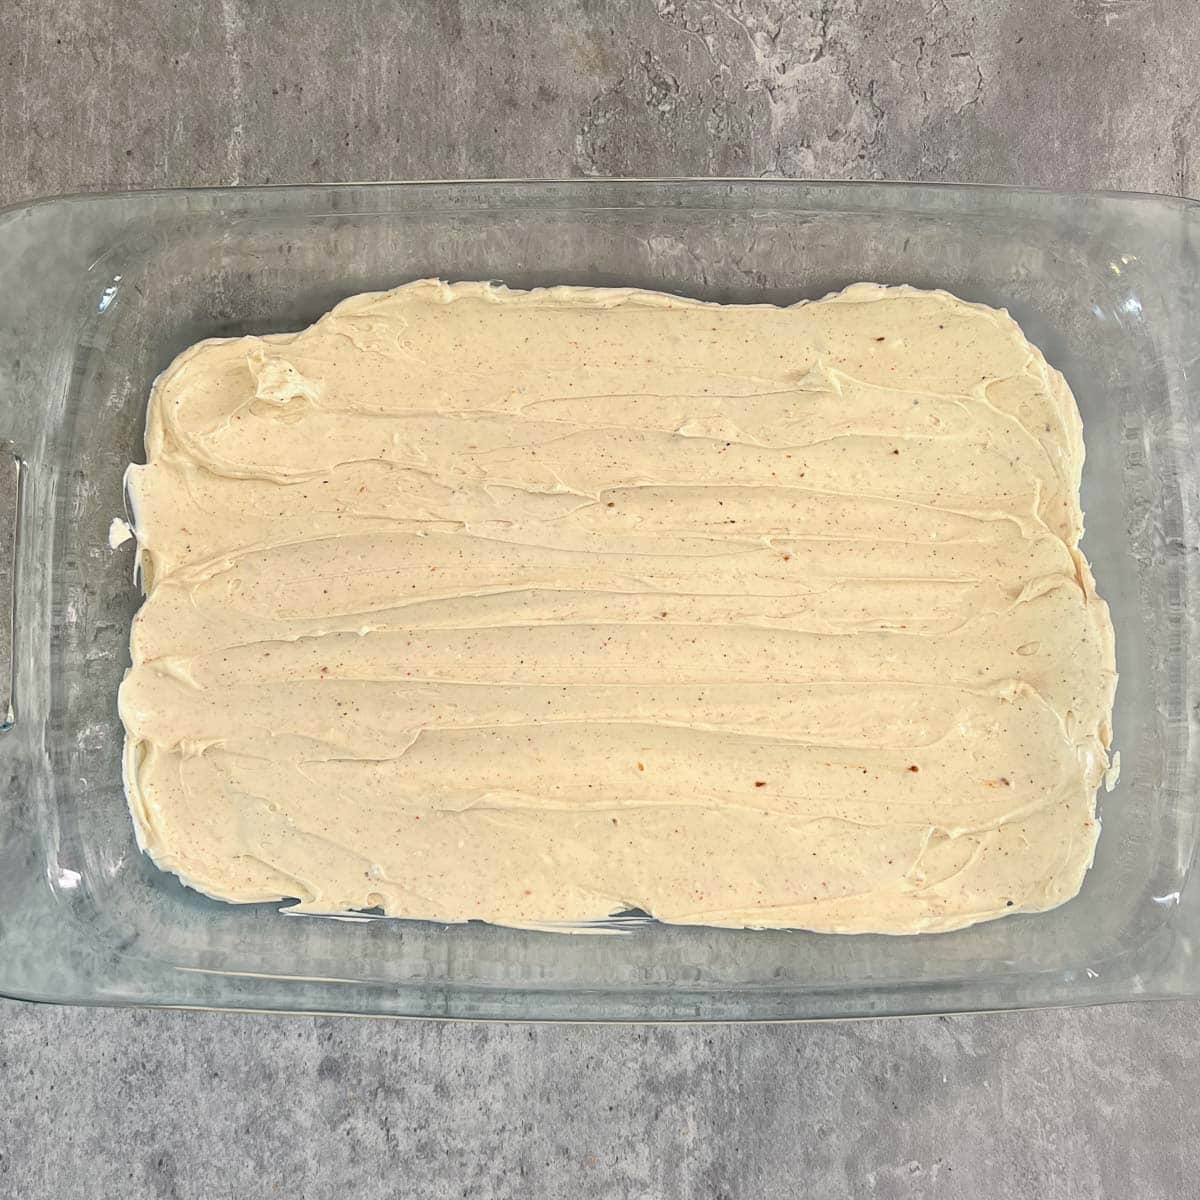 cream cheese layer of Mexican bean dip in pan